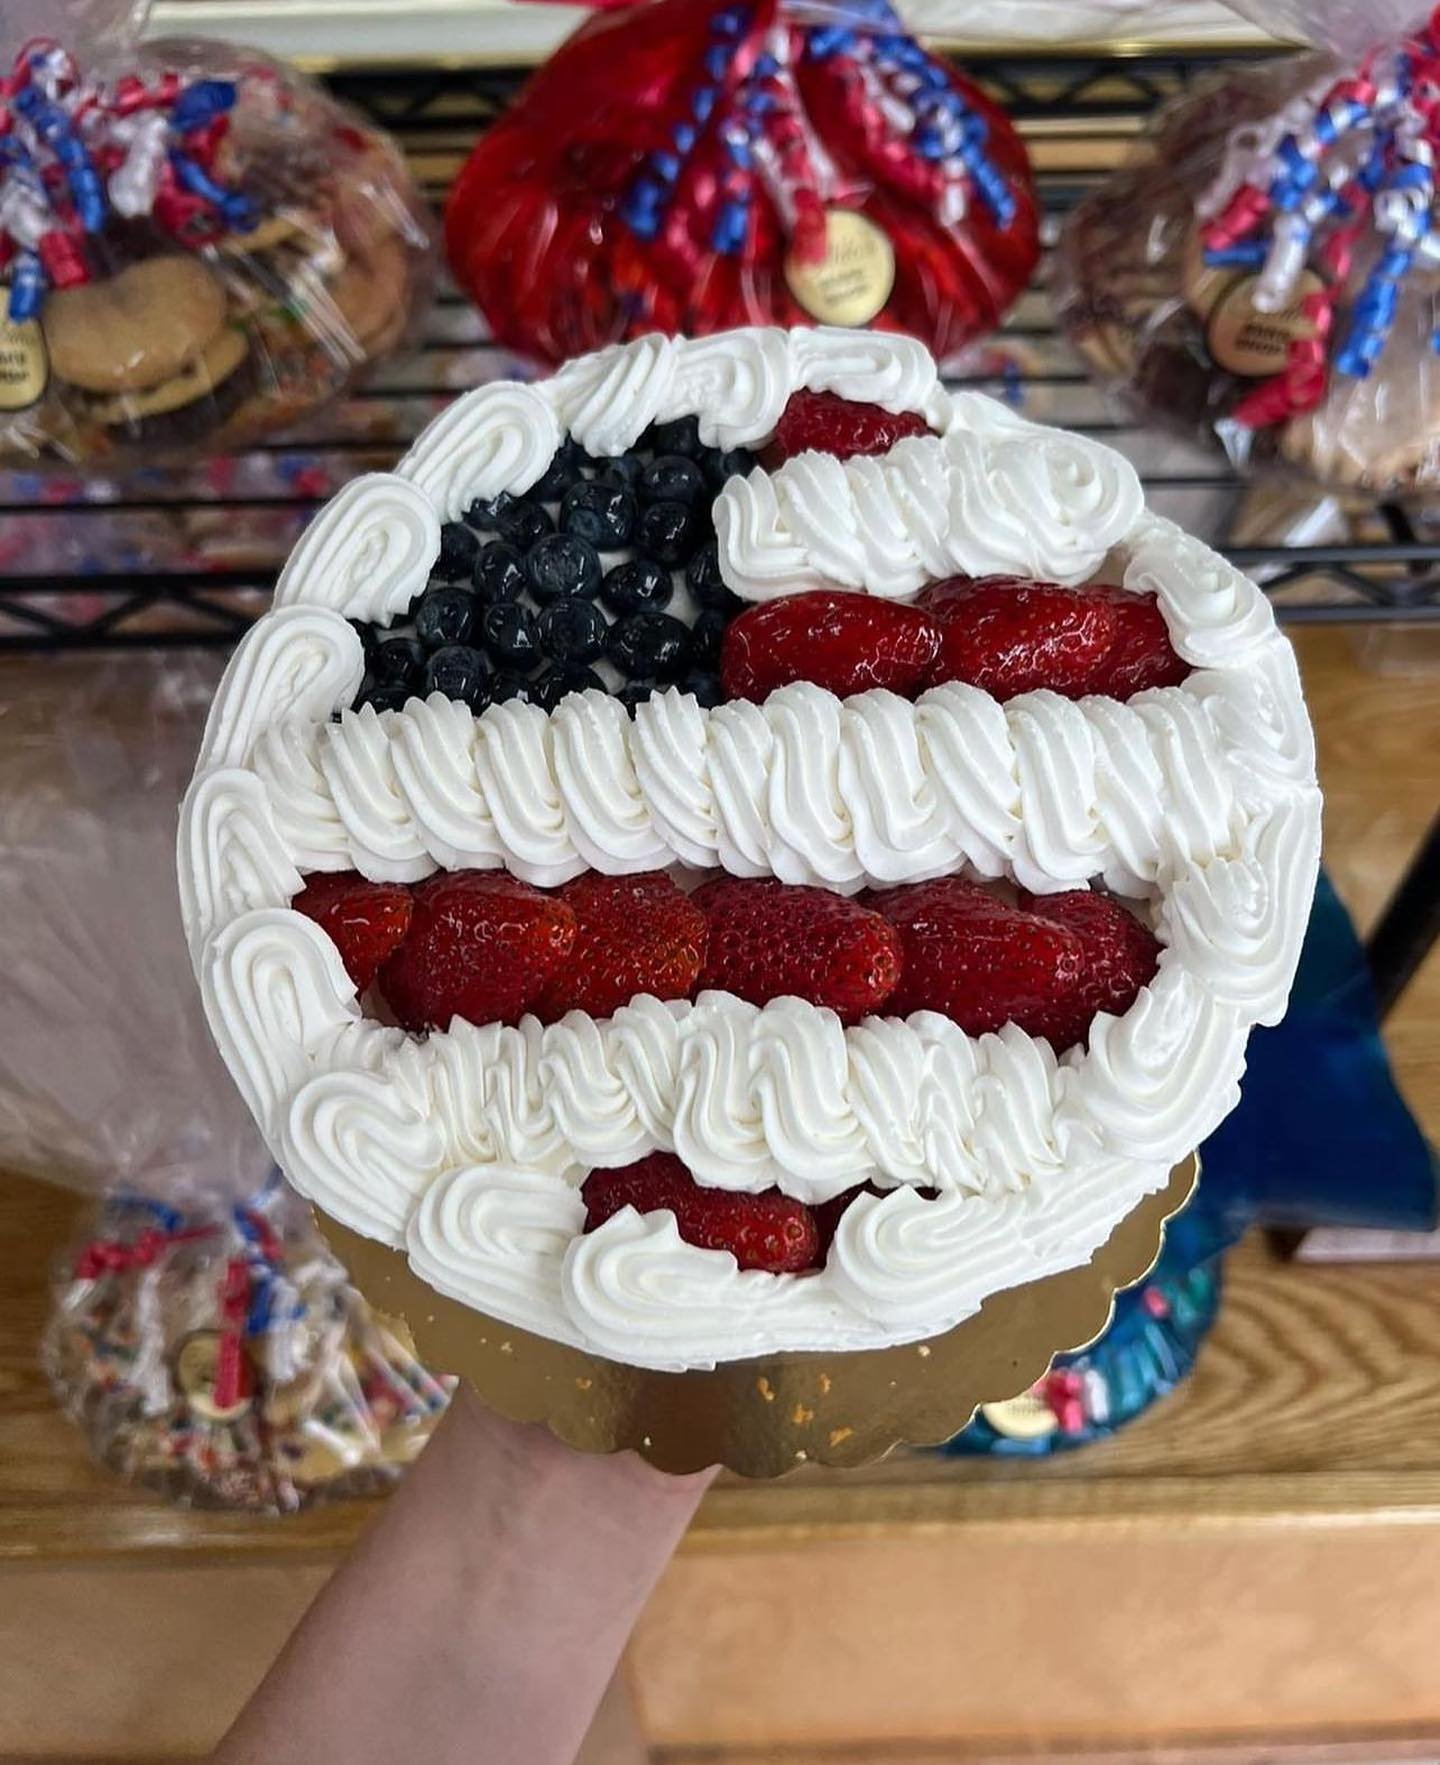 Every Memorial Day BBQ needs a fresh fruit flag cake to get festive! 🍓🍰 Yellow cake, whipped cream topped and filled with blueberries and strawberries😍🇺🇸
-
-
#flagcake #memorialdaycake #bakery #longisland